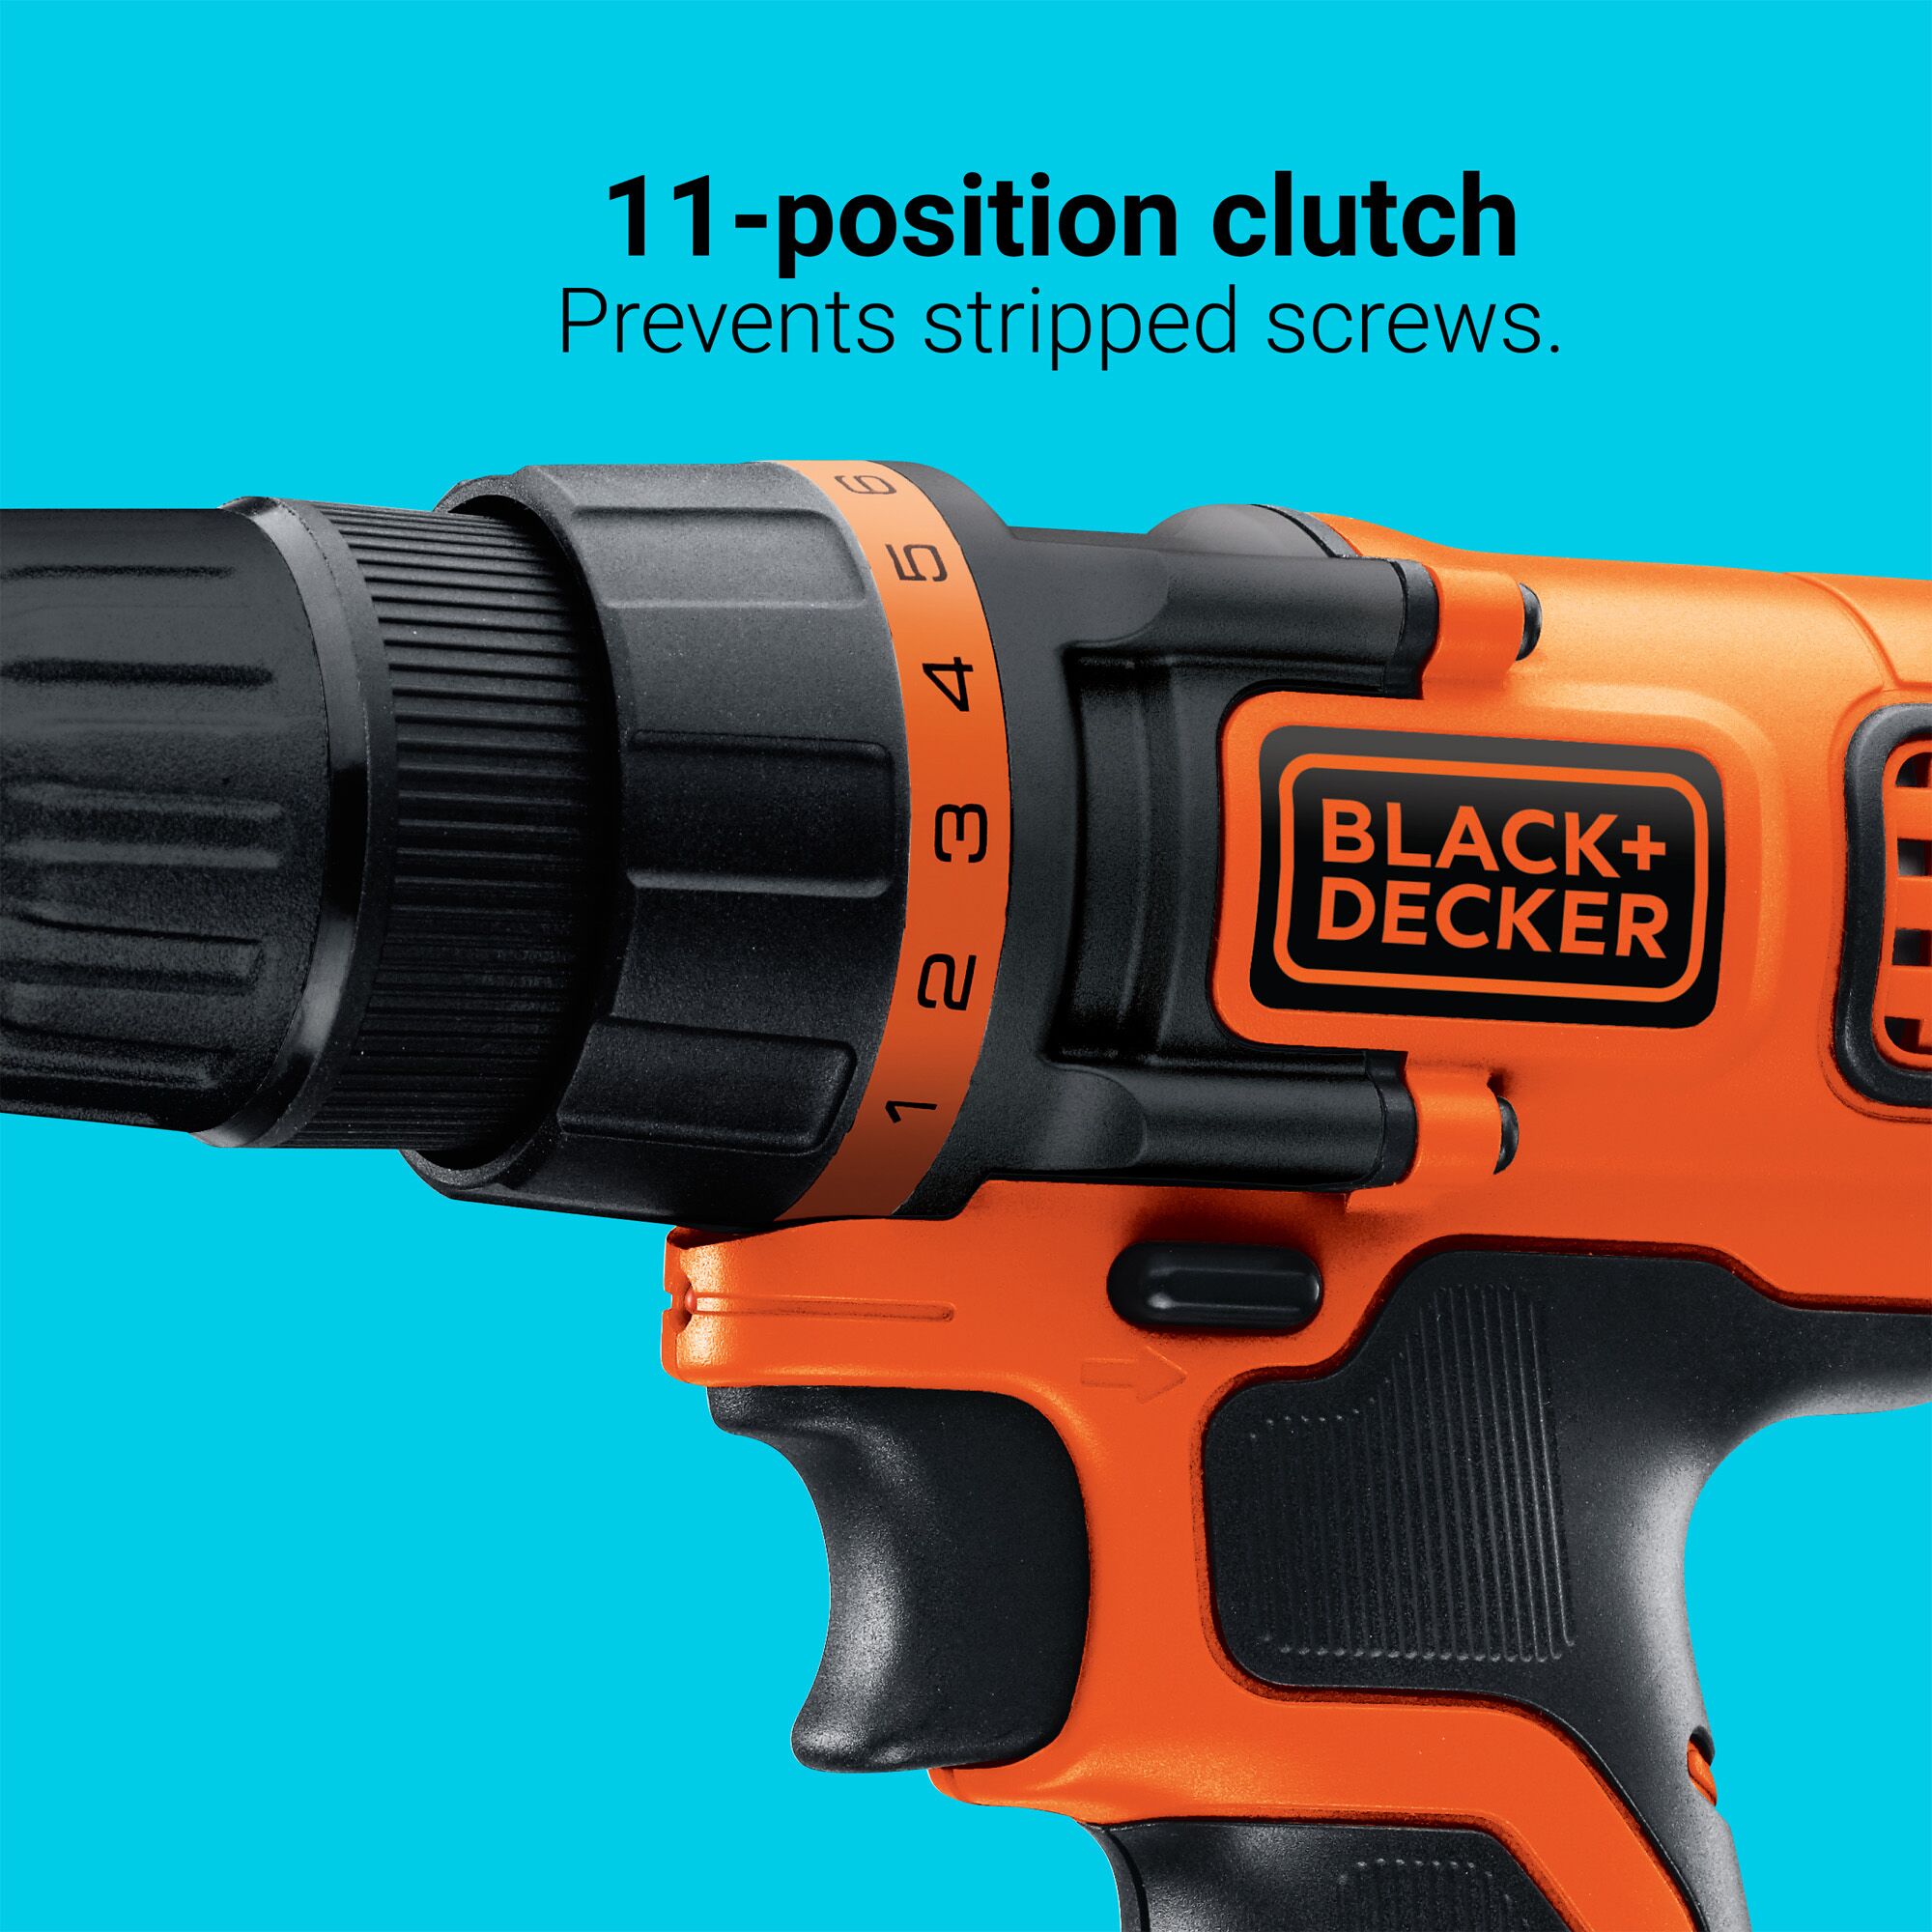 Black+Decker 2 Tool Combo Kit, Battery & Charger Included. - tools